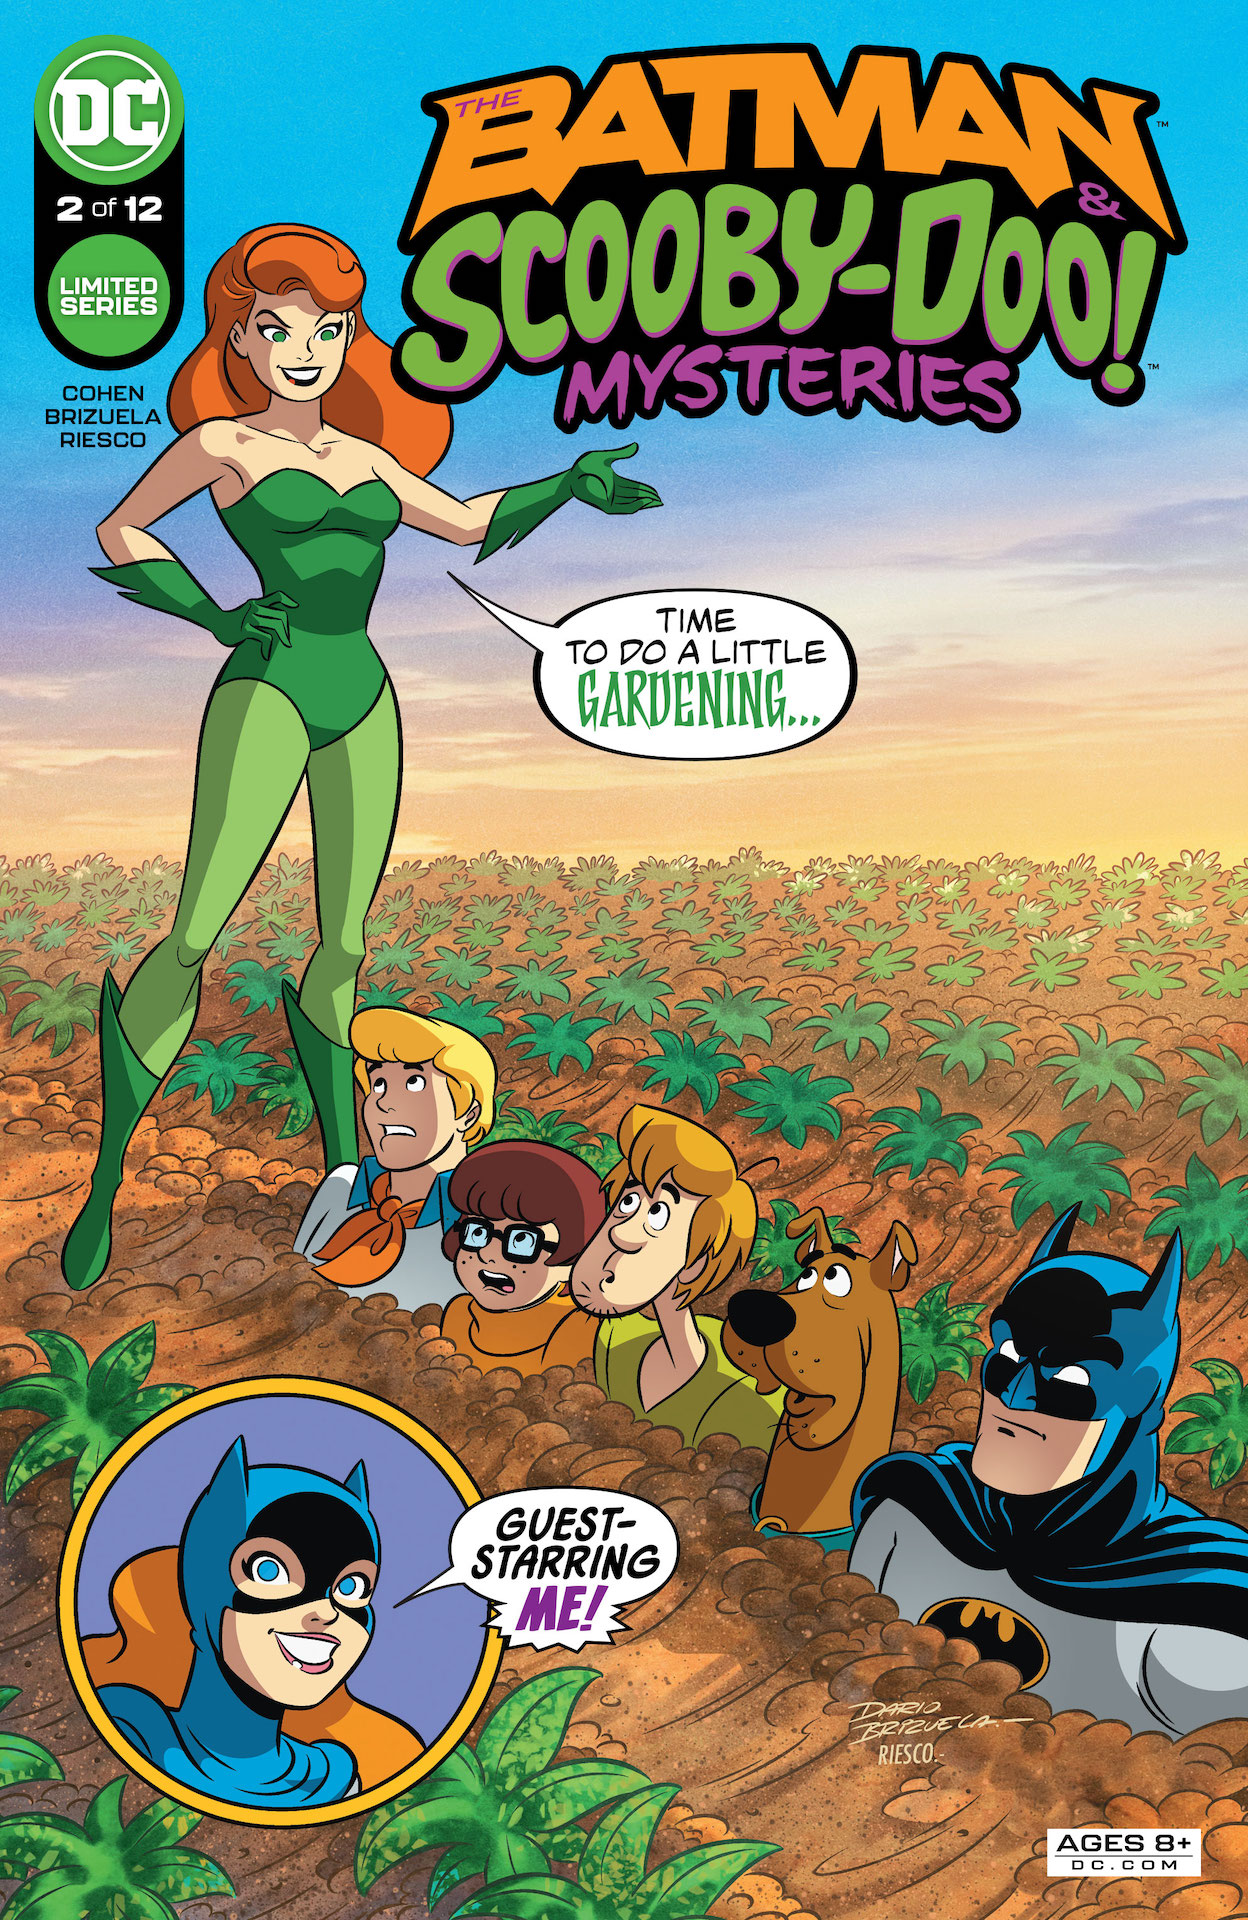 DC Preview: The Batman & Scooby-Doo Mysteries #2